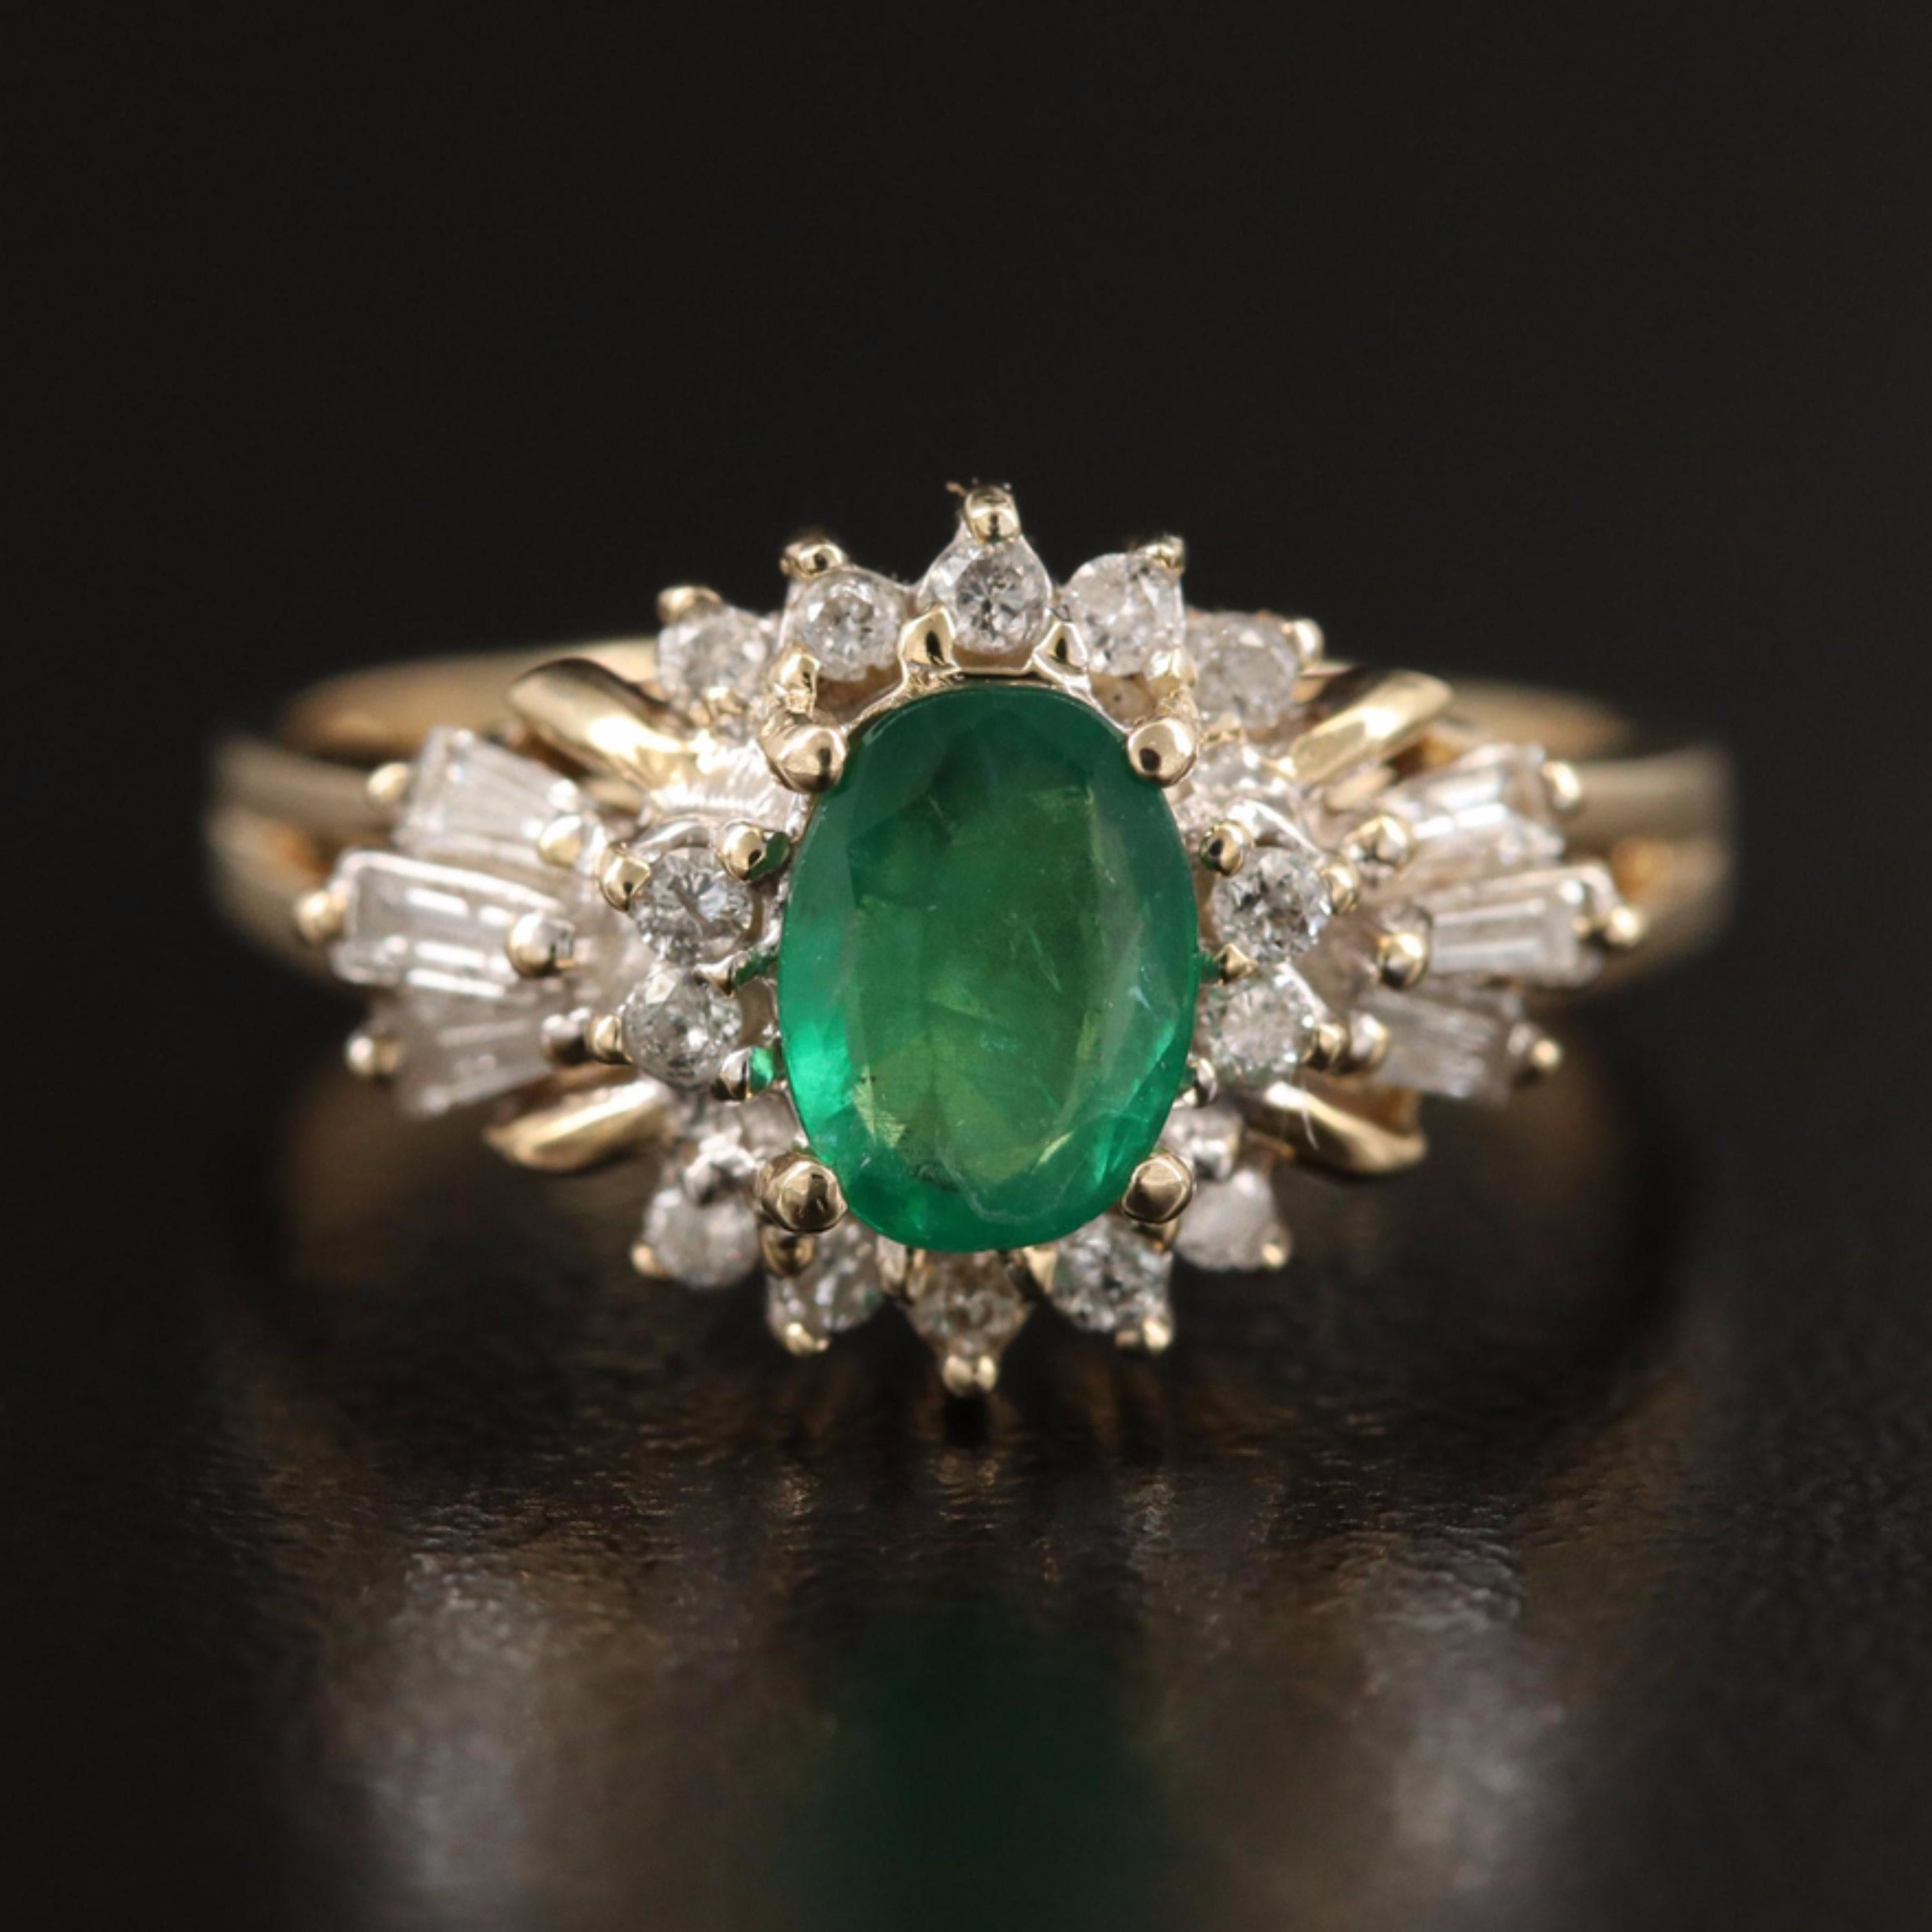 For Sale:  Oval Cut Natural Emerald Engagement Ring, Floral Emerald Diamond Wedding Ring  6